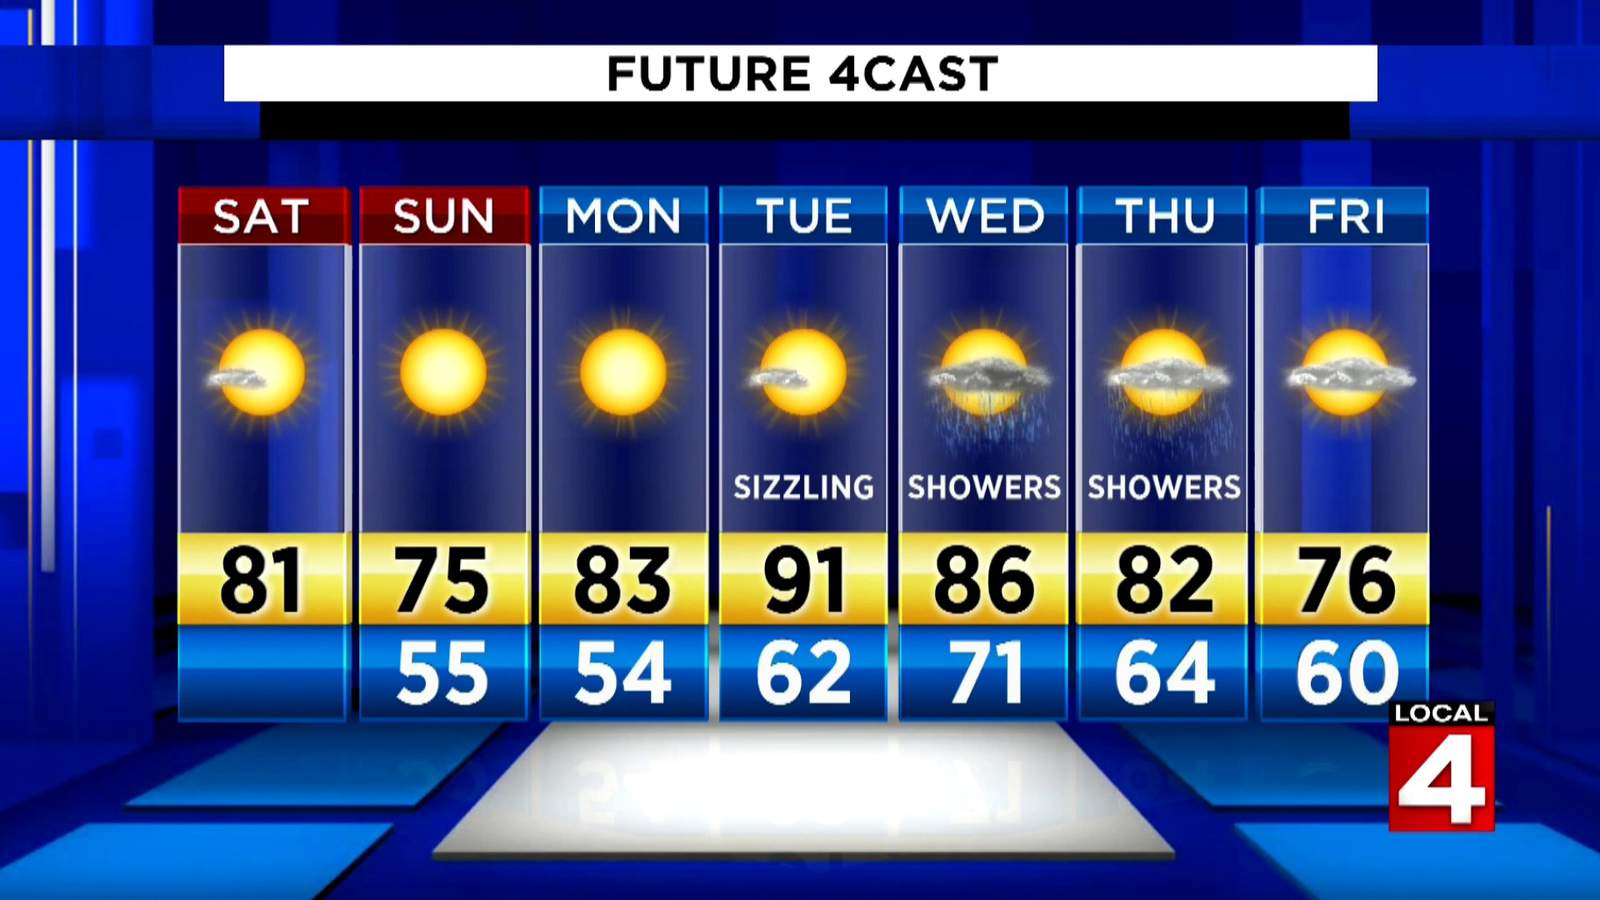 weather forecast - Future 4CAST Sat Sun Mon Tue Wed Thu Fri Sizzling Showers Showers 81 75 83 91 86 82 76 55 54 6271 64 60 4 Local